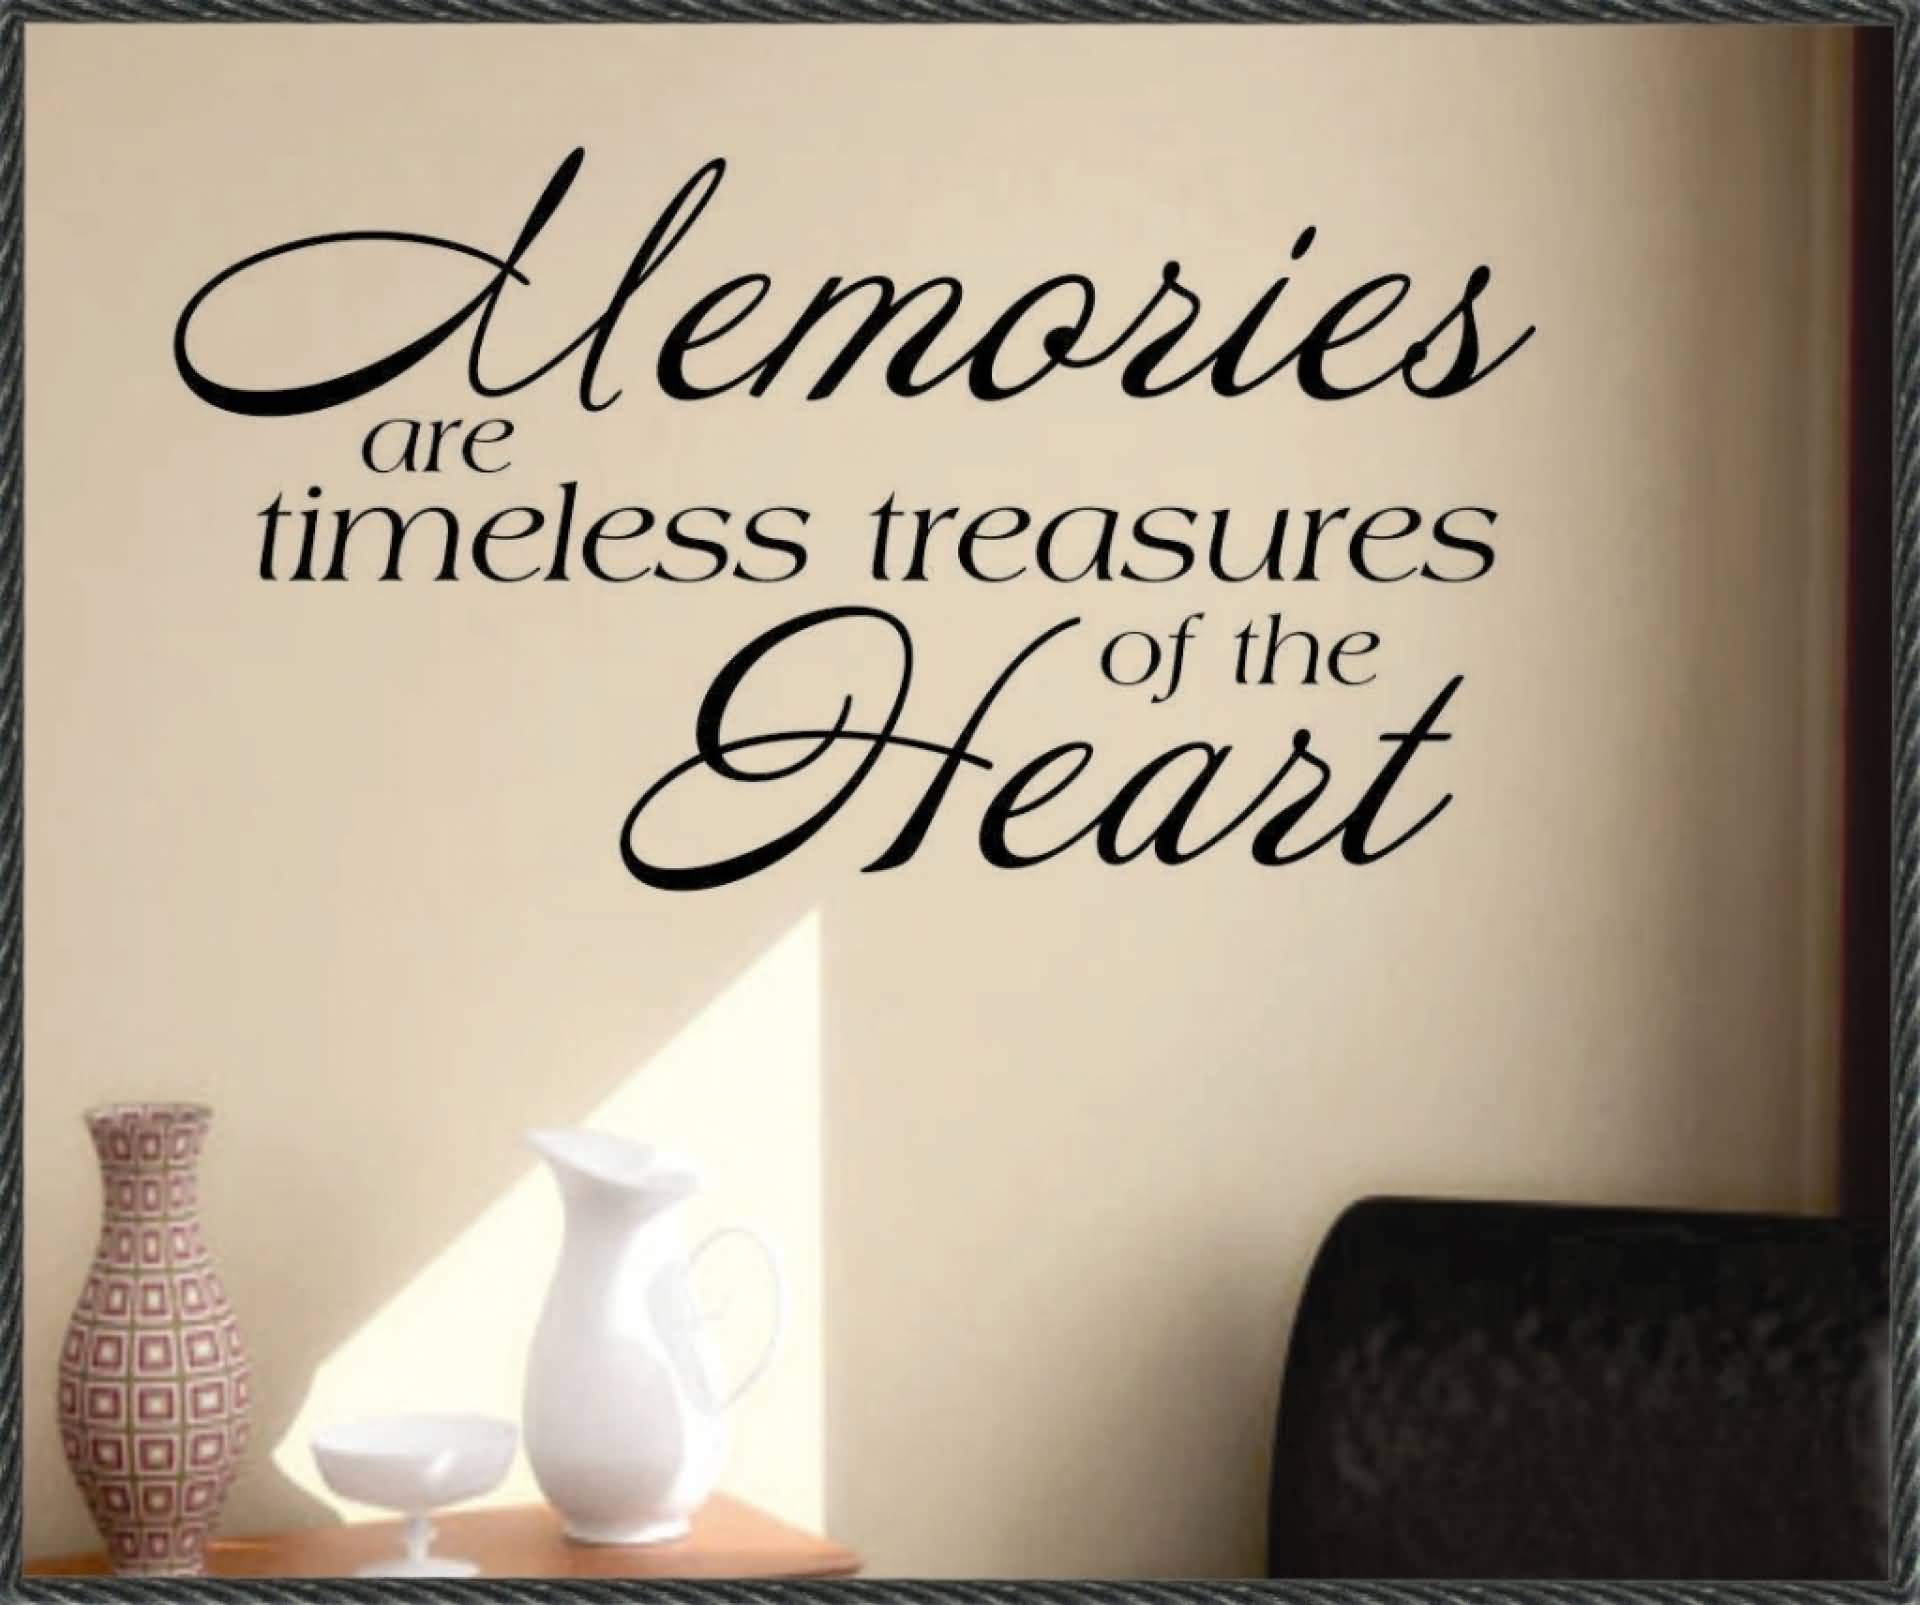 In Remembrance Quotes Of A Loved One 19